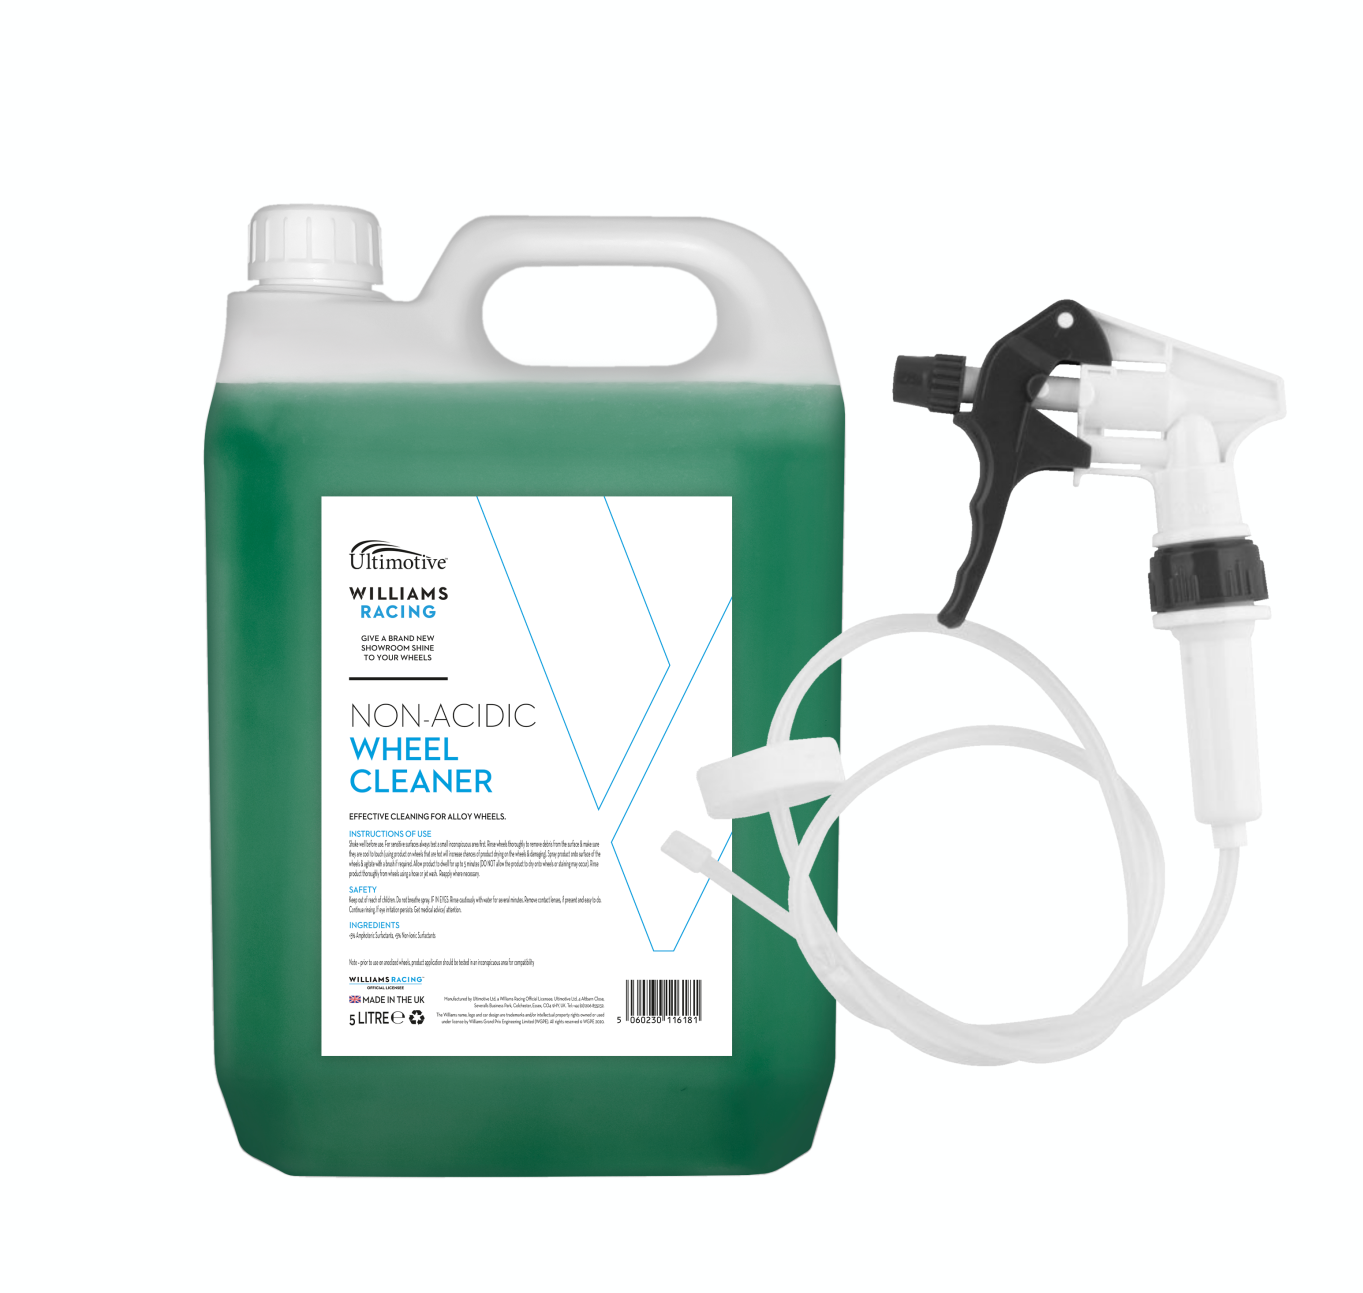 Williams Non-Acidic Wheel Cleaner 5L (with Long Hose Trigger)